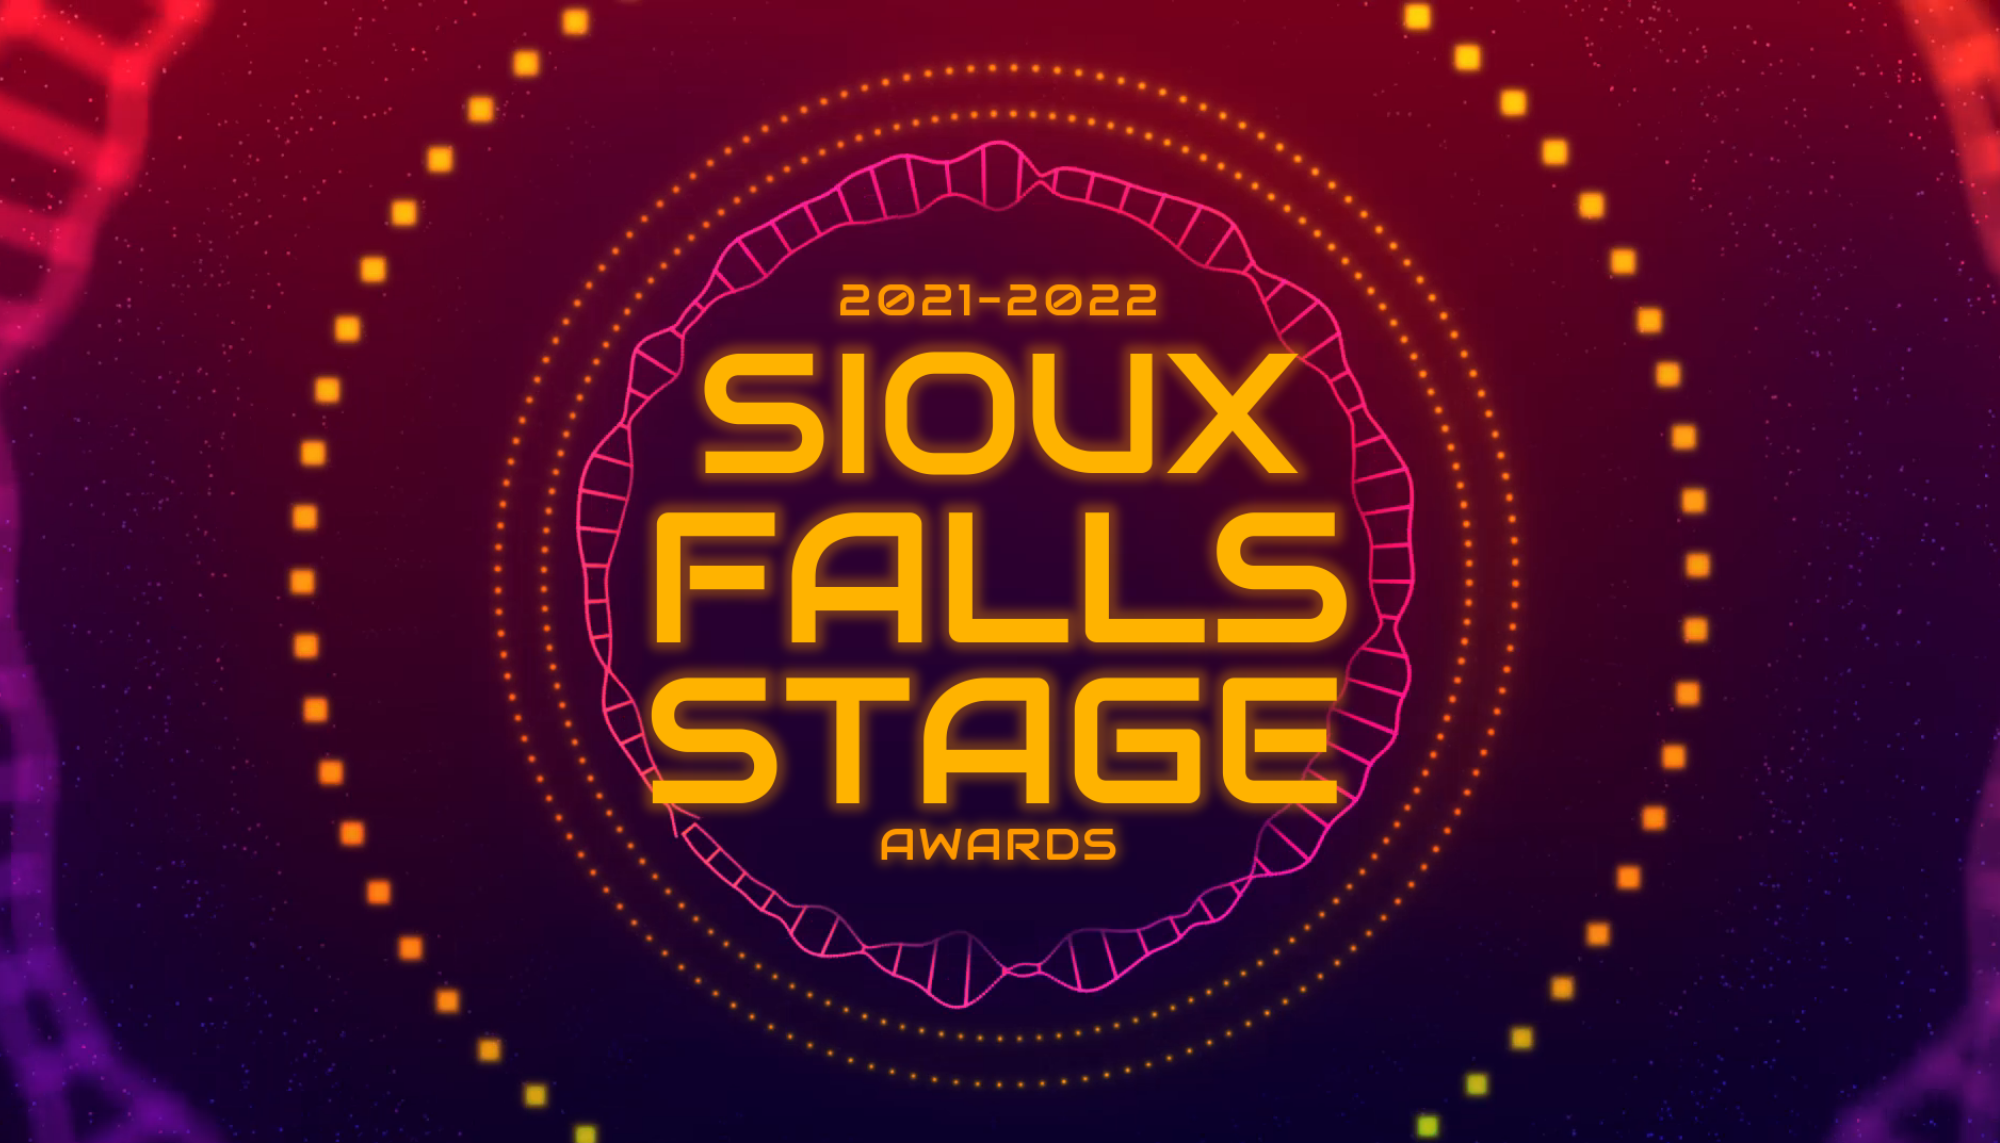 Sioux Falls Stage Awards